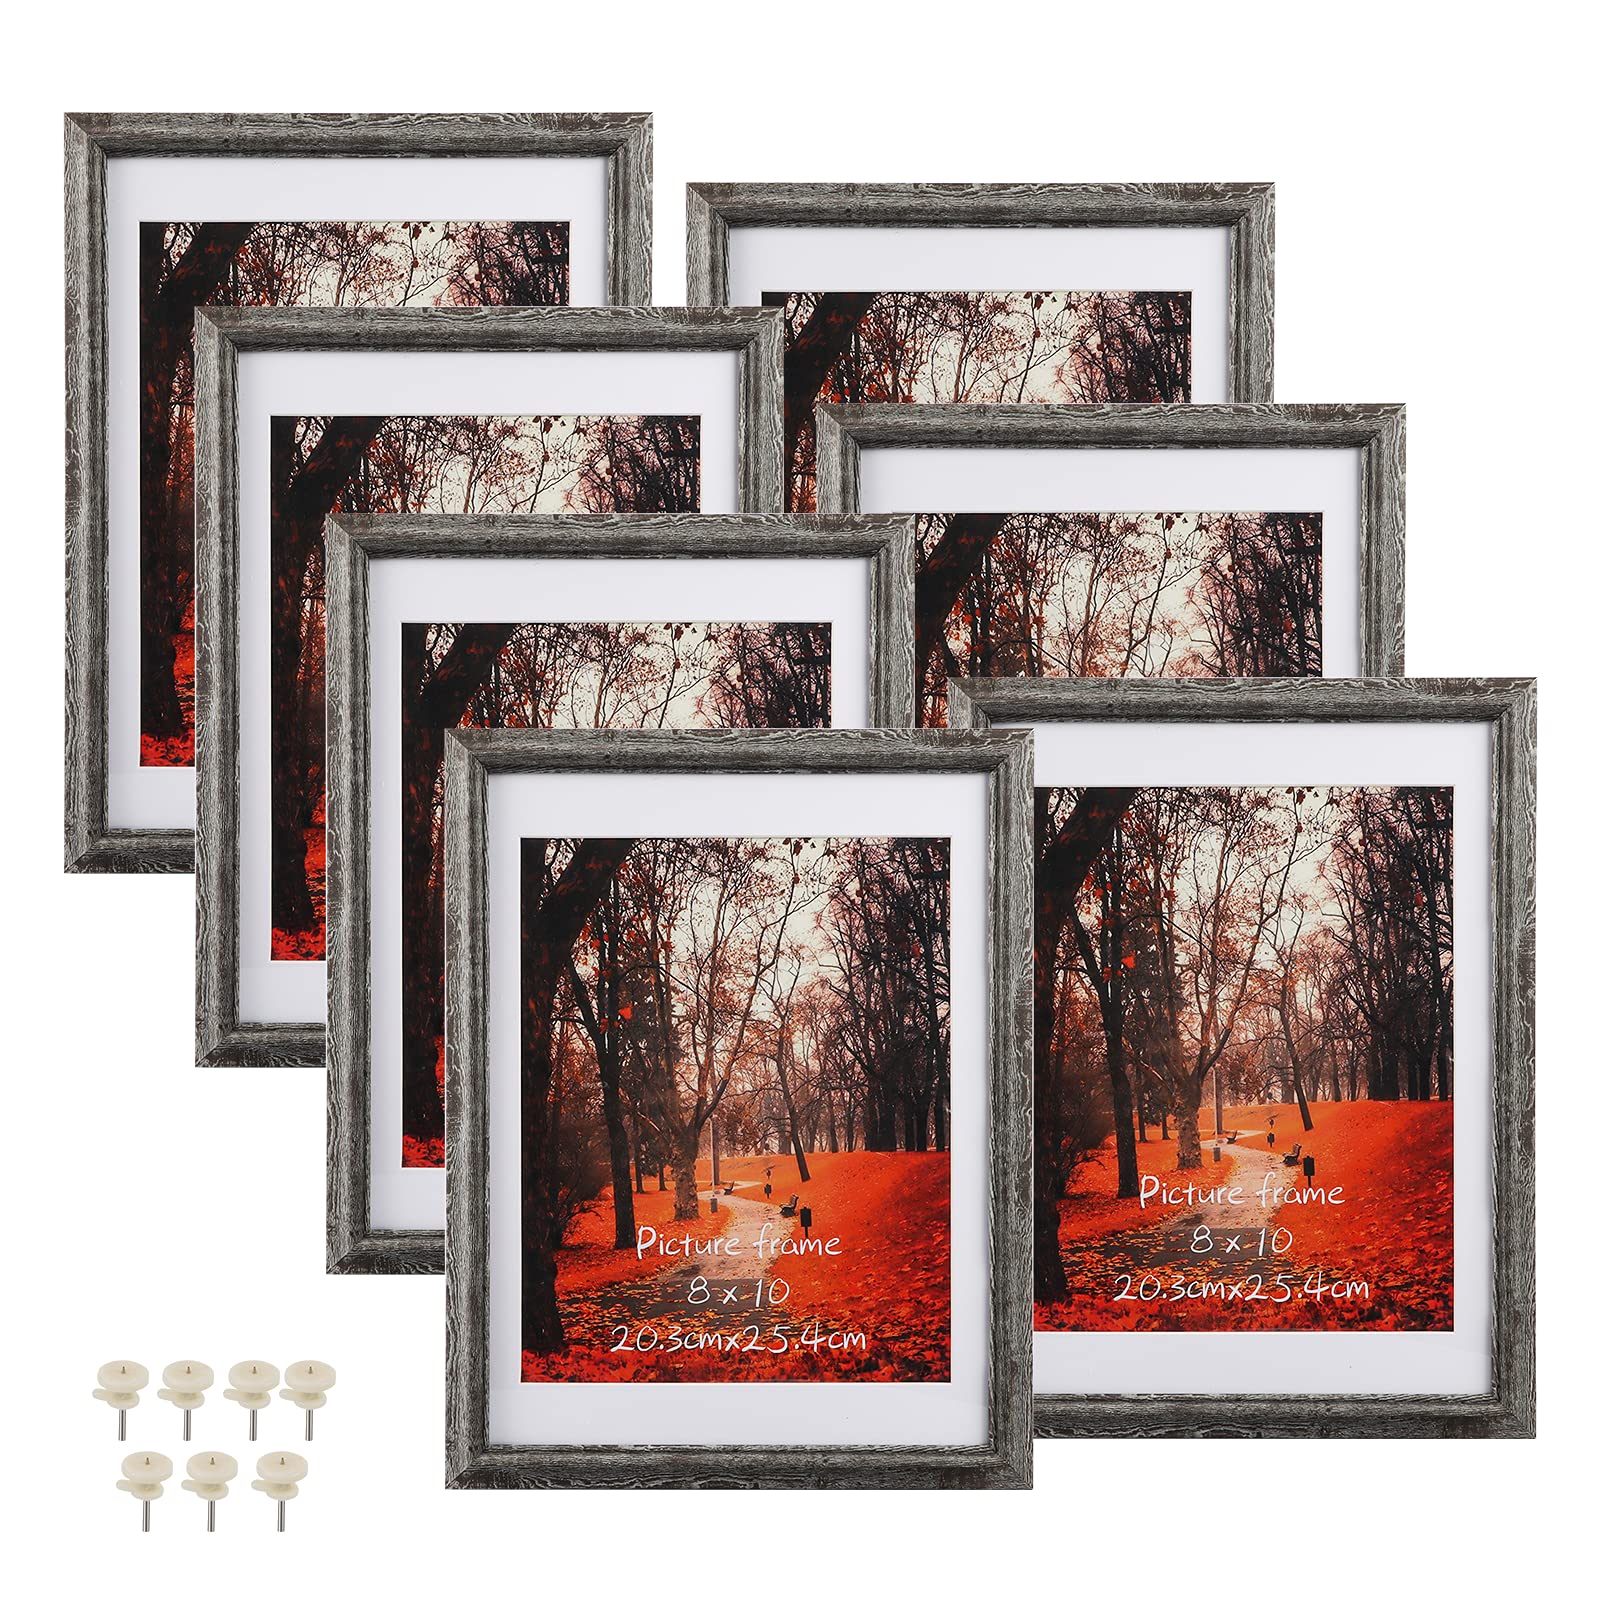 7 Pack 8x10 Picture Frames with Mat, Rustic Distressed Art Wall Hanging Table Desk 10x8 Family Gallery Multi Photo Frame 9x12 Without Mat